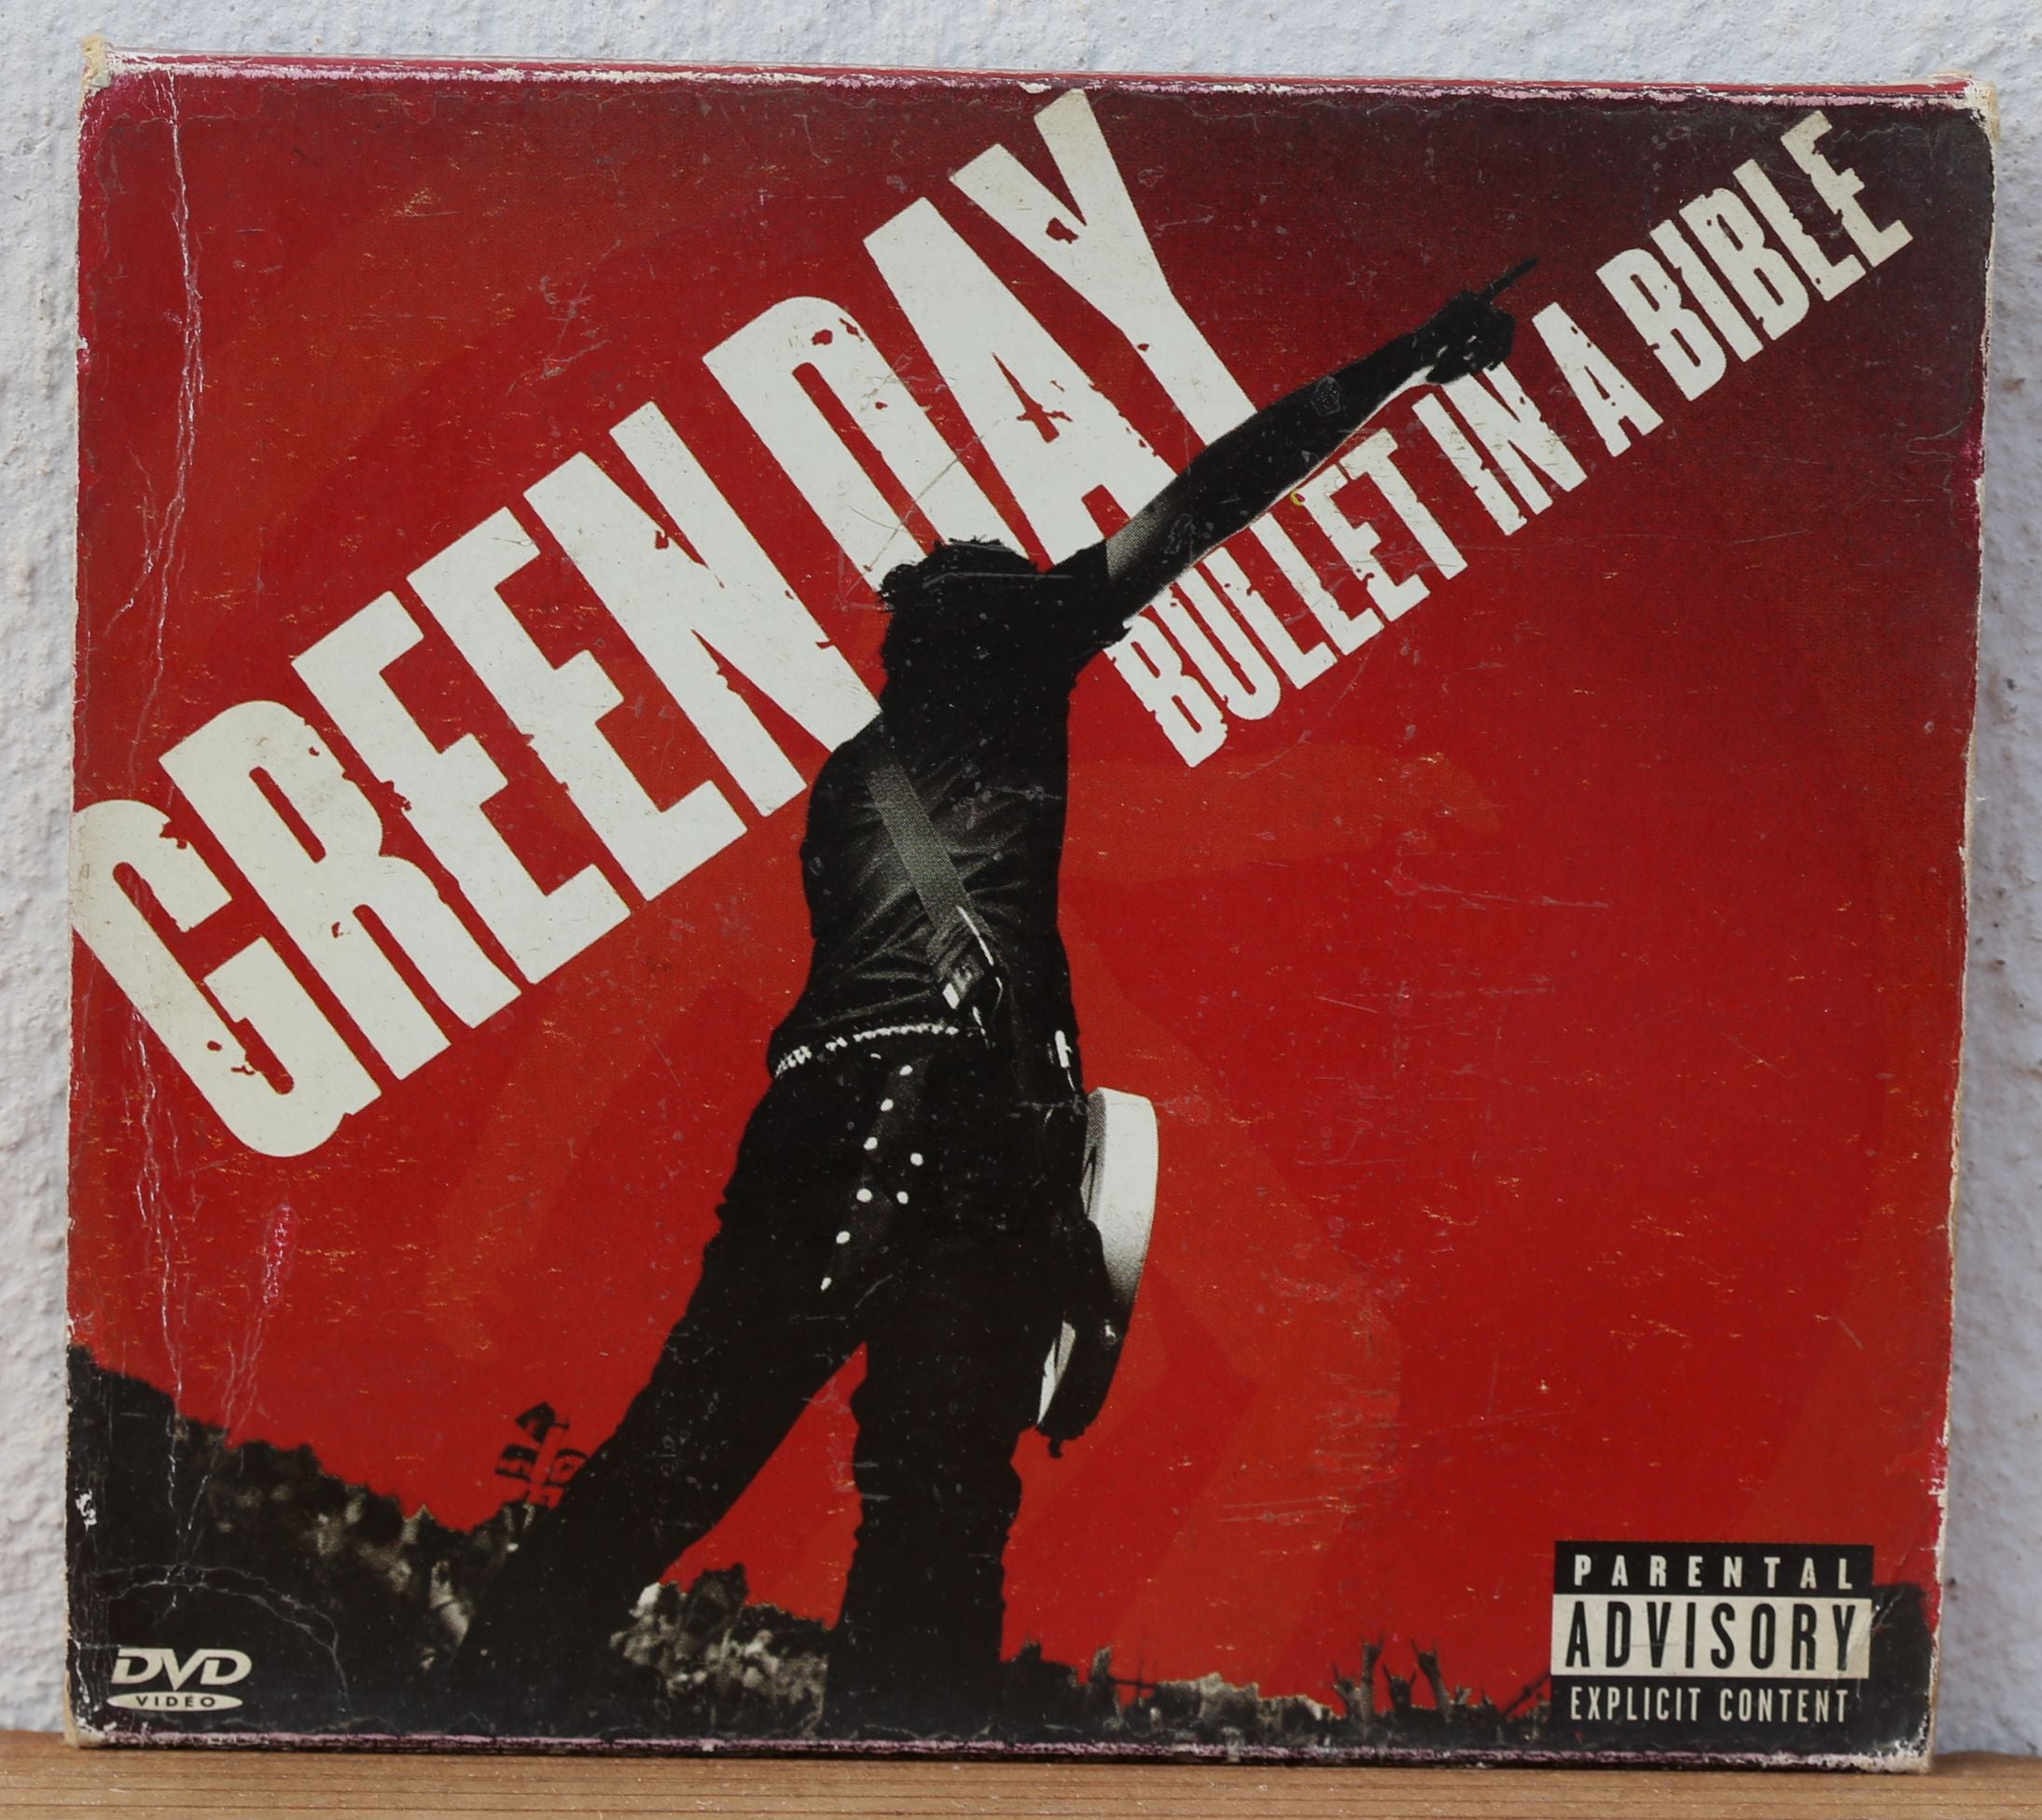 Green Day - Bullet in a bible (2-disc cd/dvd combo) – R62 Music Store